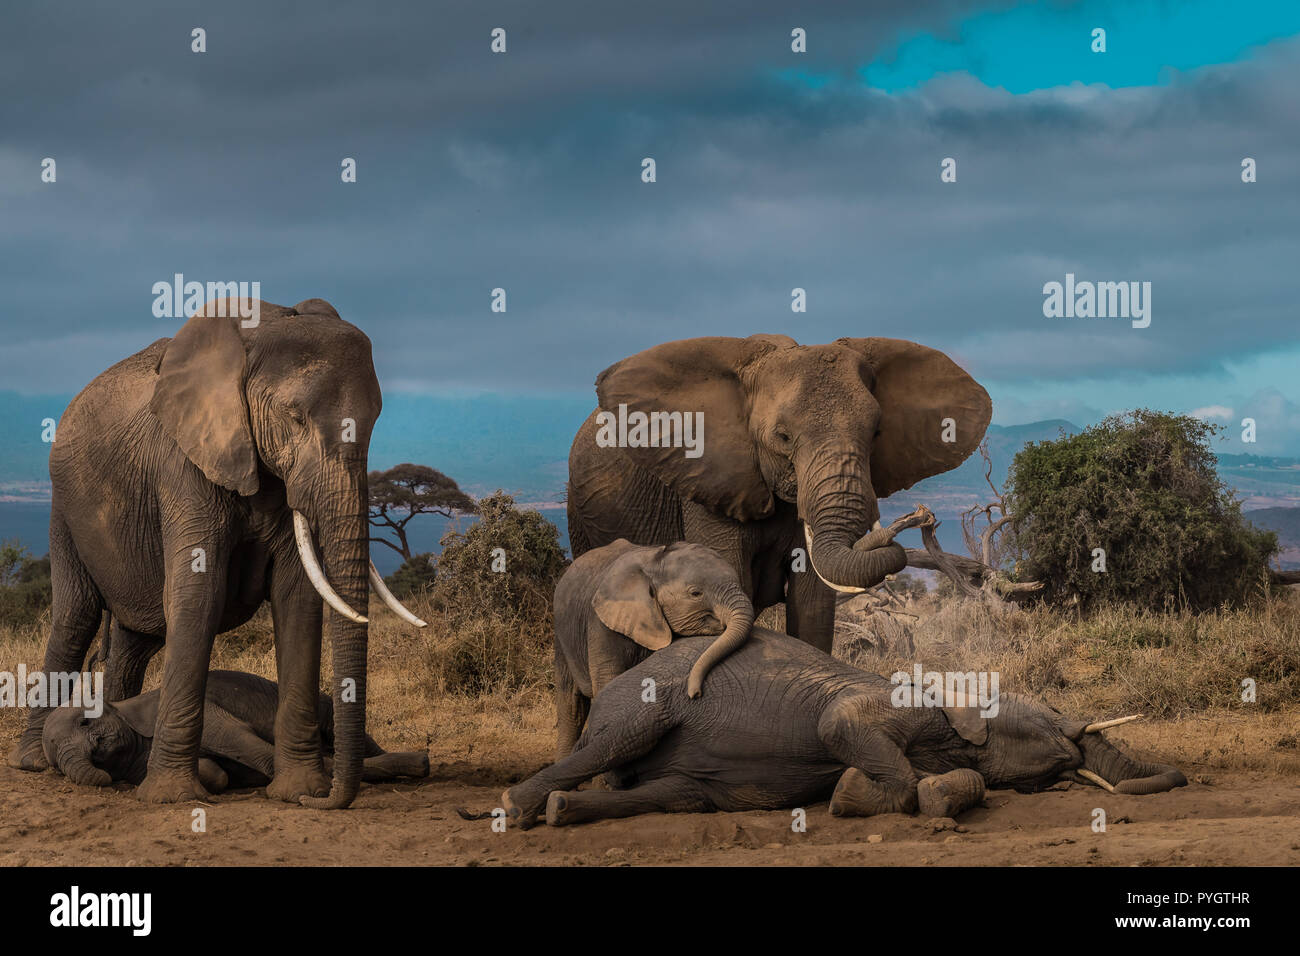 This image of Elephant's family is taken at Amboseli in Kenya. Stock Photo